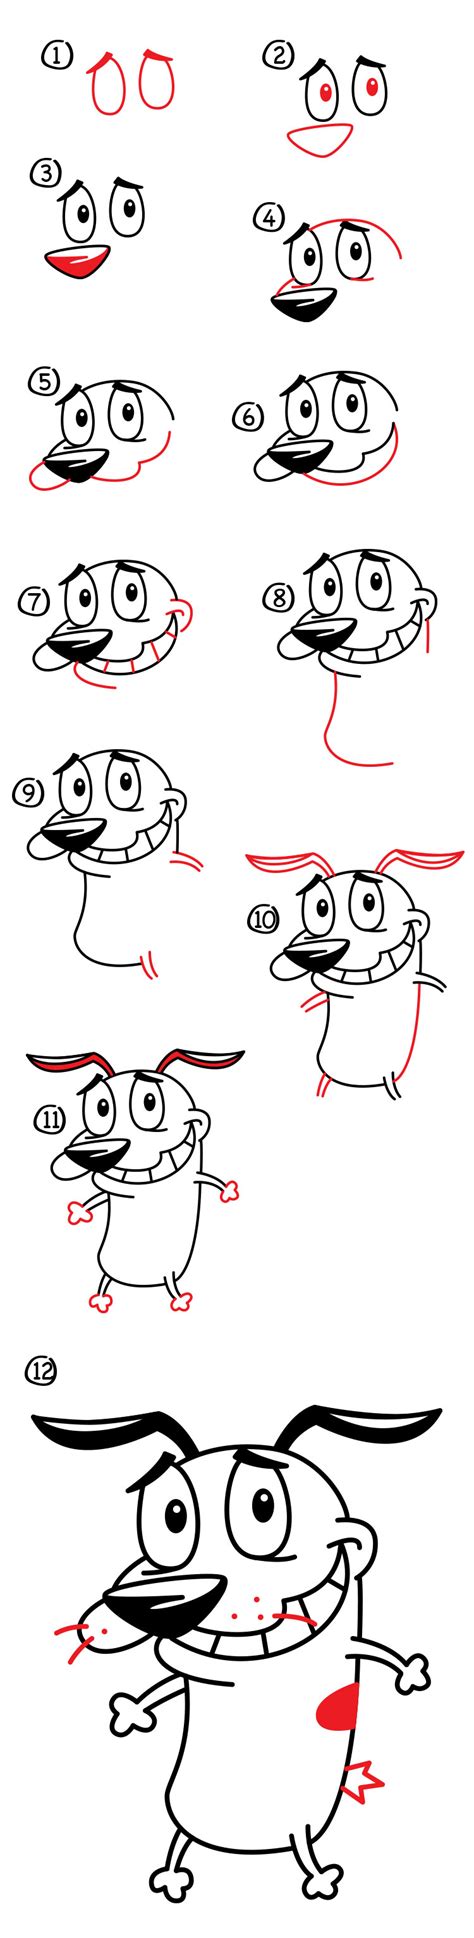 How To Draw Courage Courage The Cowardly Dog Step By